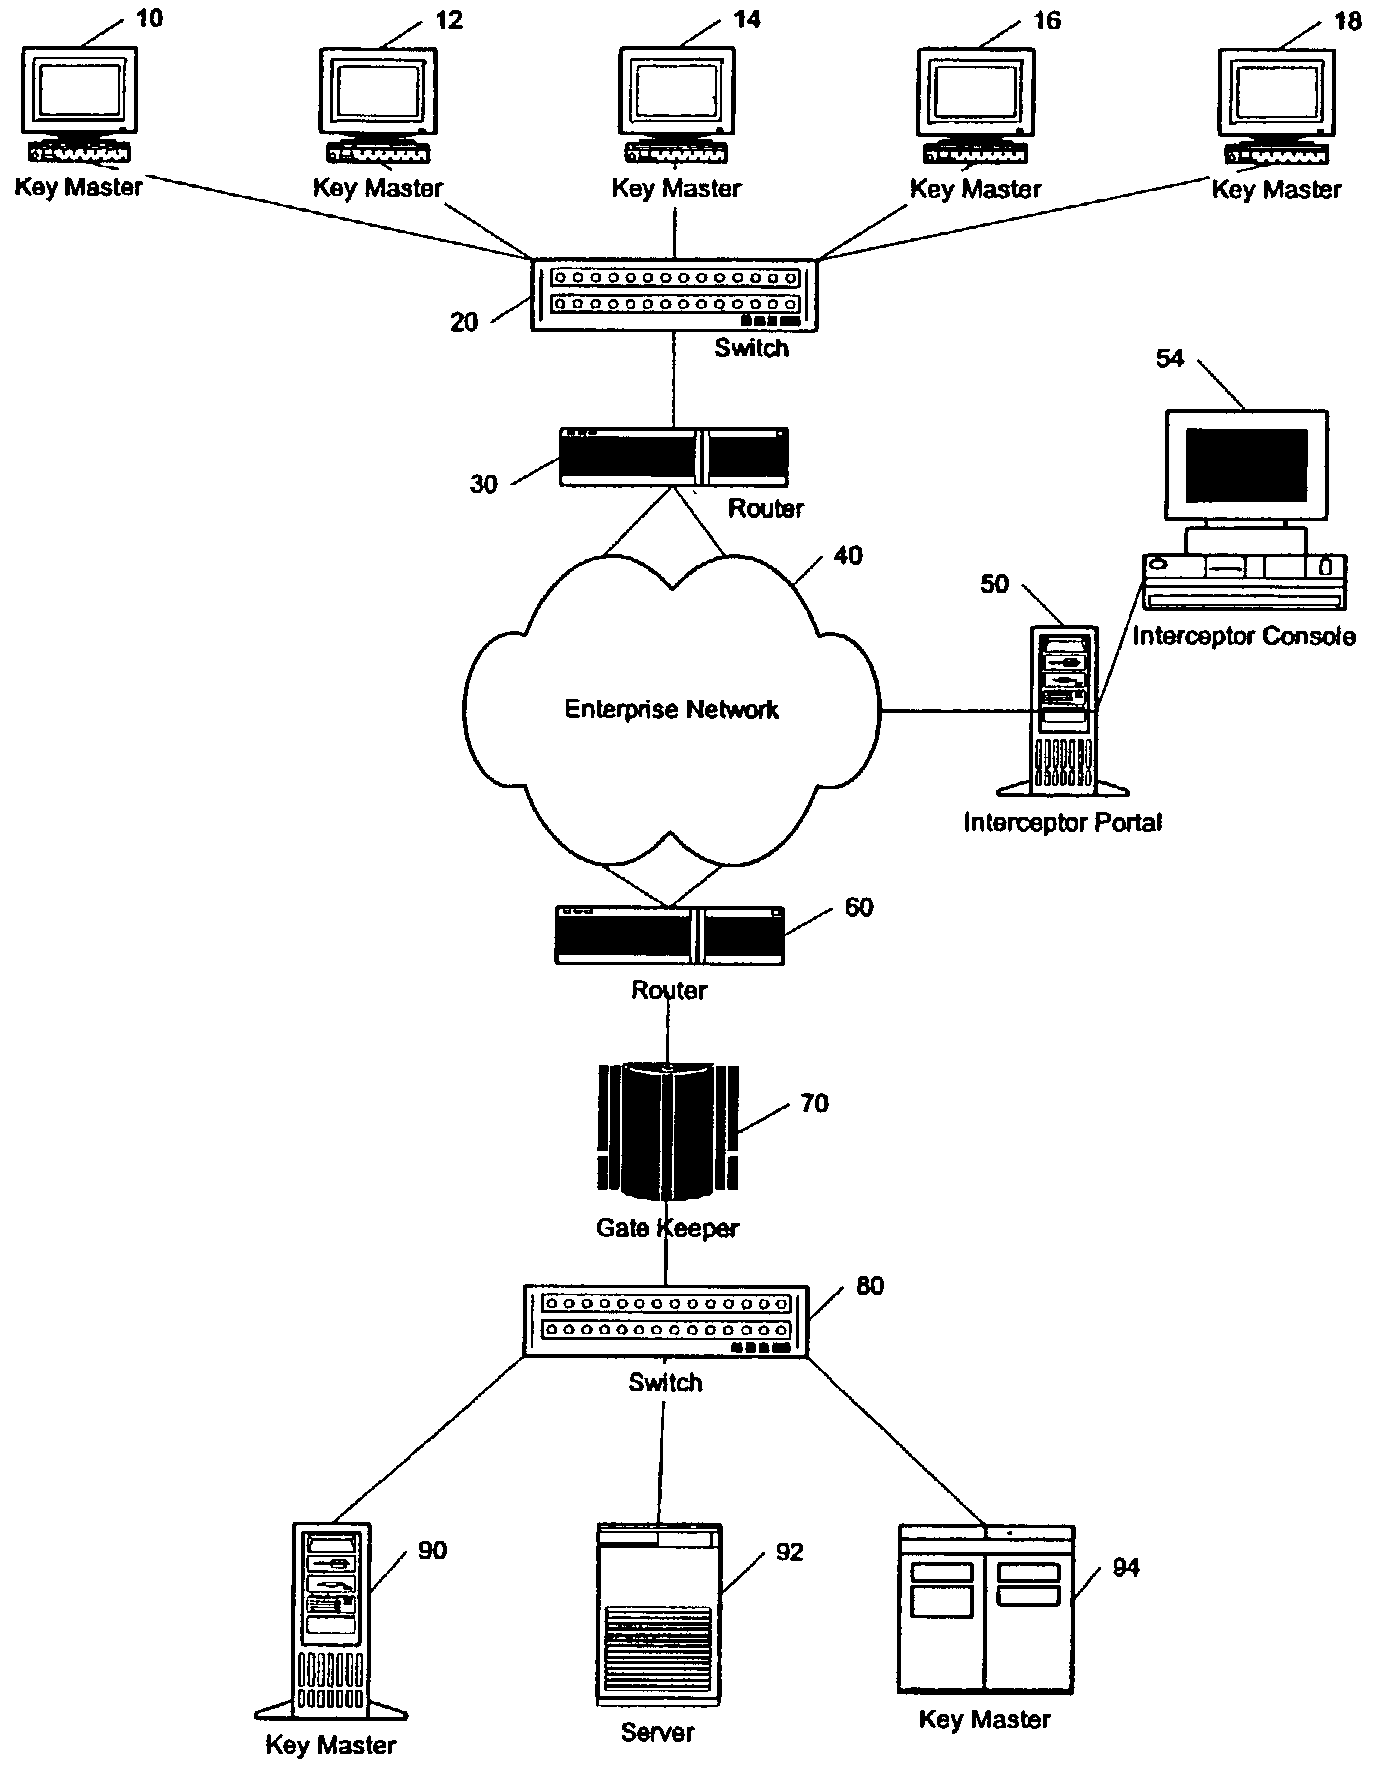 System and method for intrusion prevention in a communications network